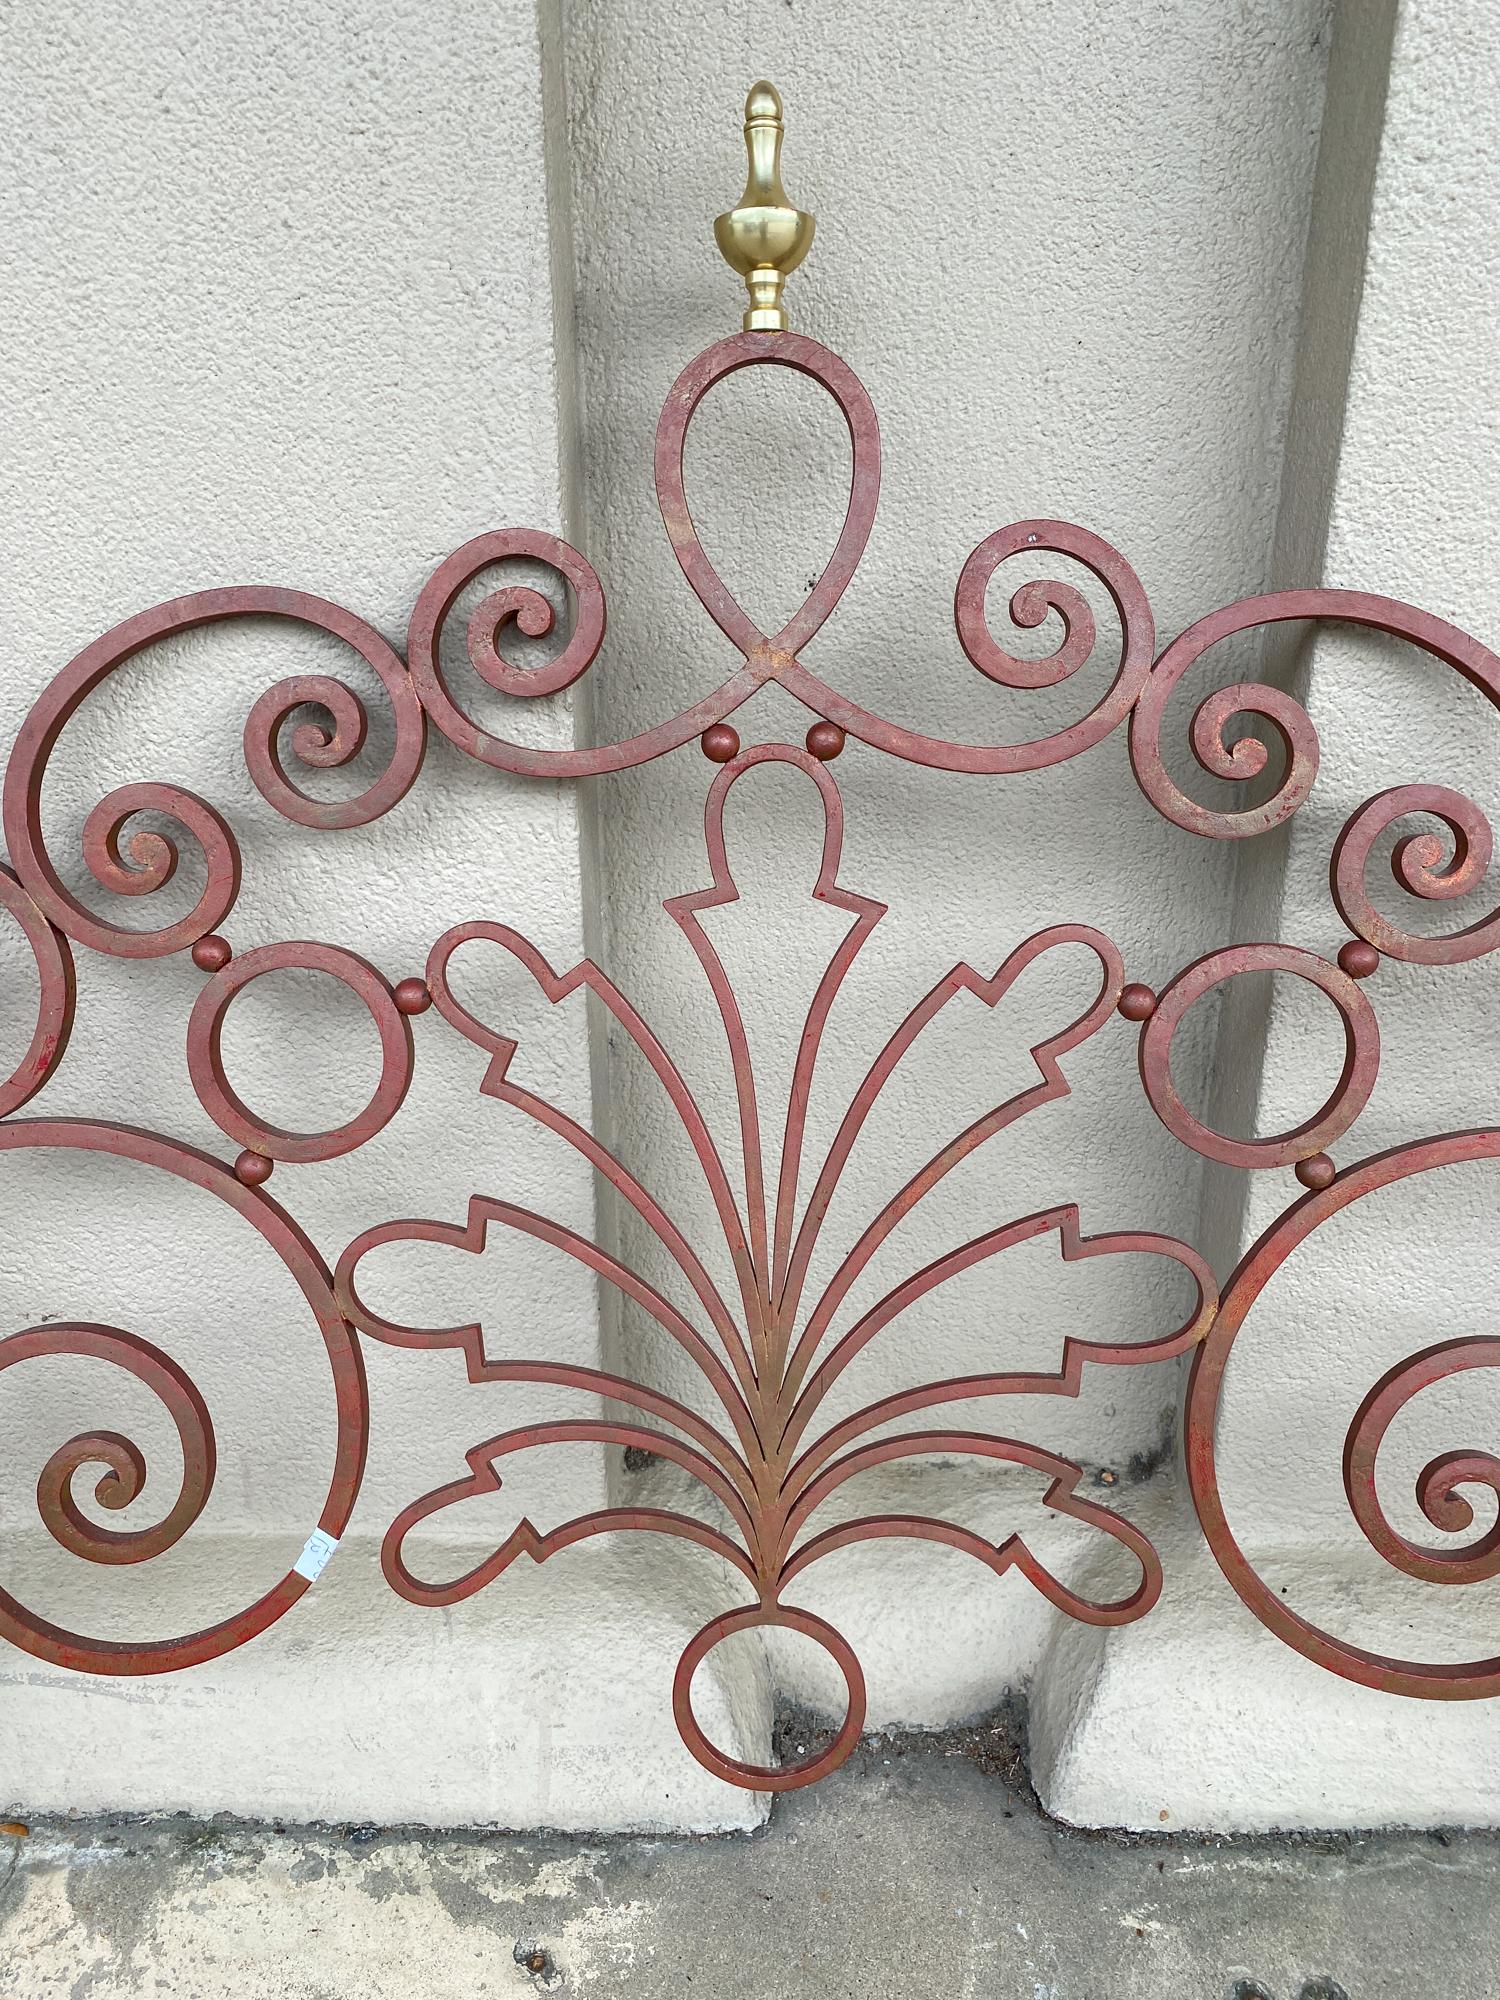 This stylized iron panel is painted in a crimson finish with turned brass finials. The piece dates to 1910 and is Art Nouveau in style. The back of the panel has three metal brackets from which this piece can be mounted to a wall, imagine this as a